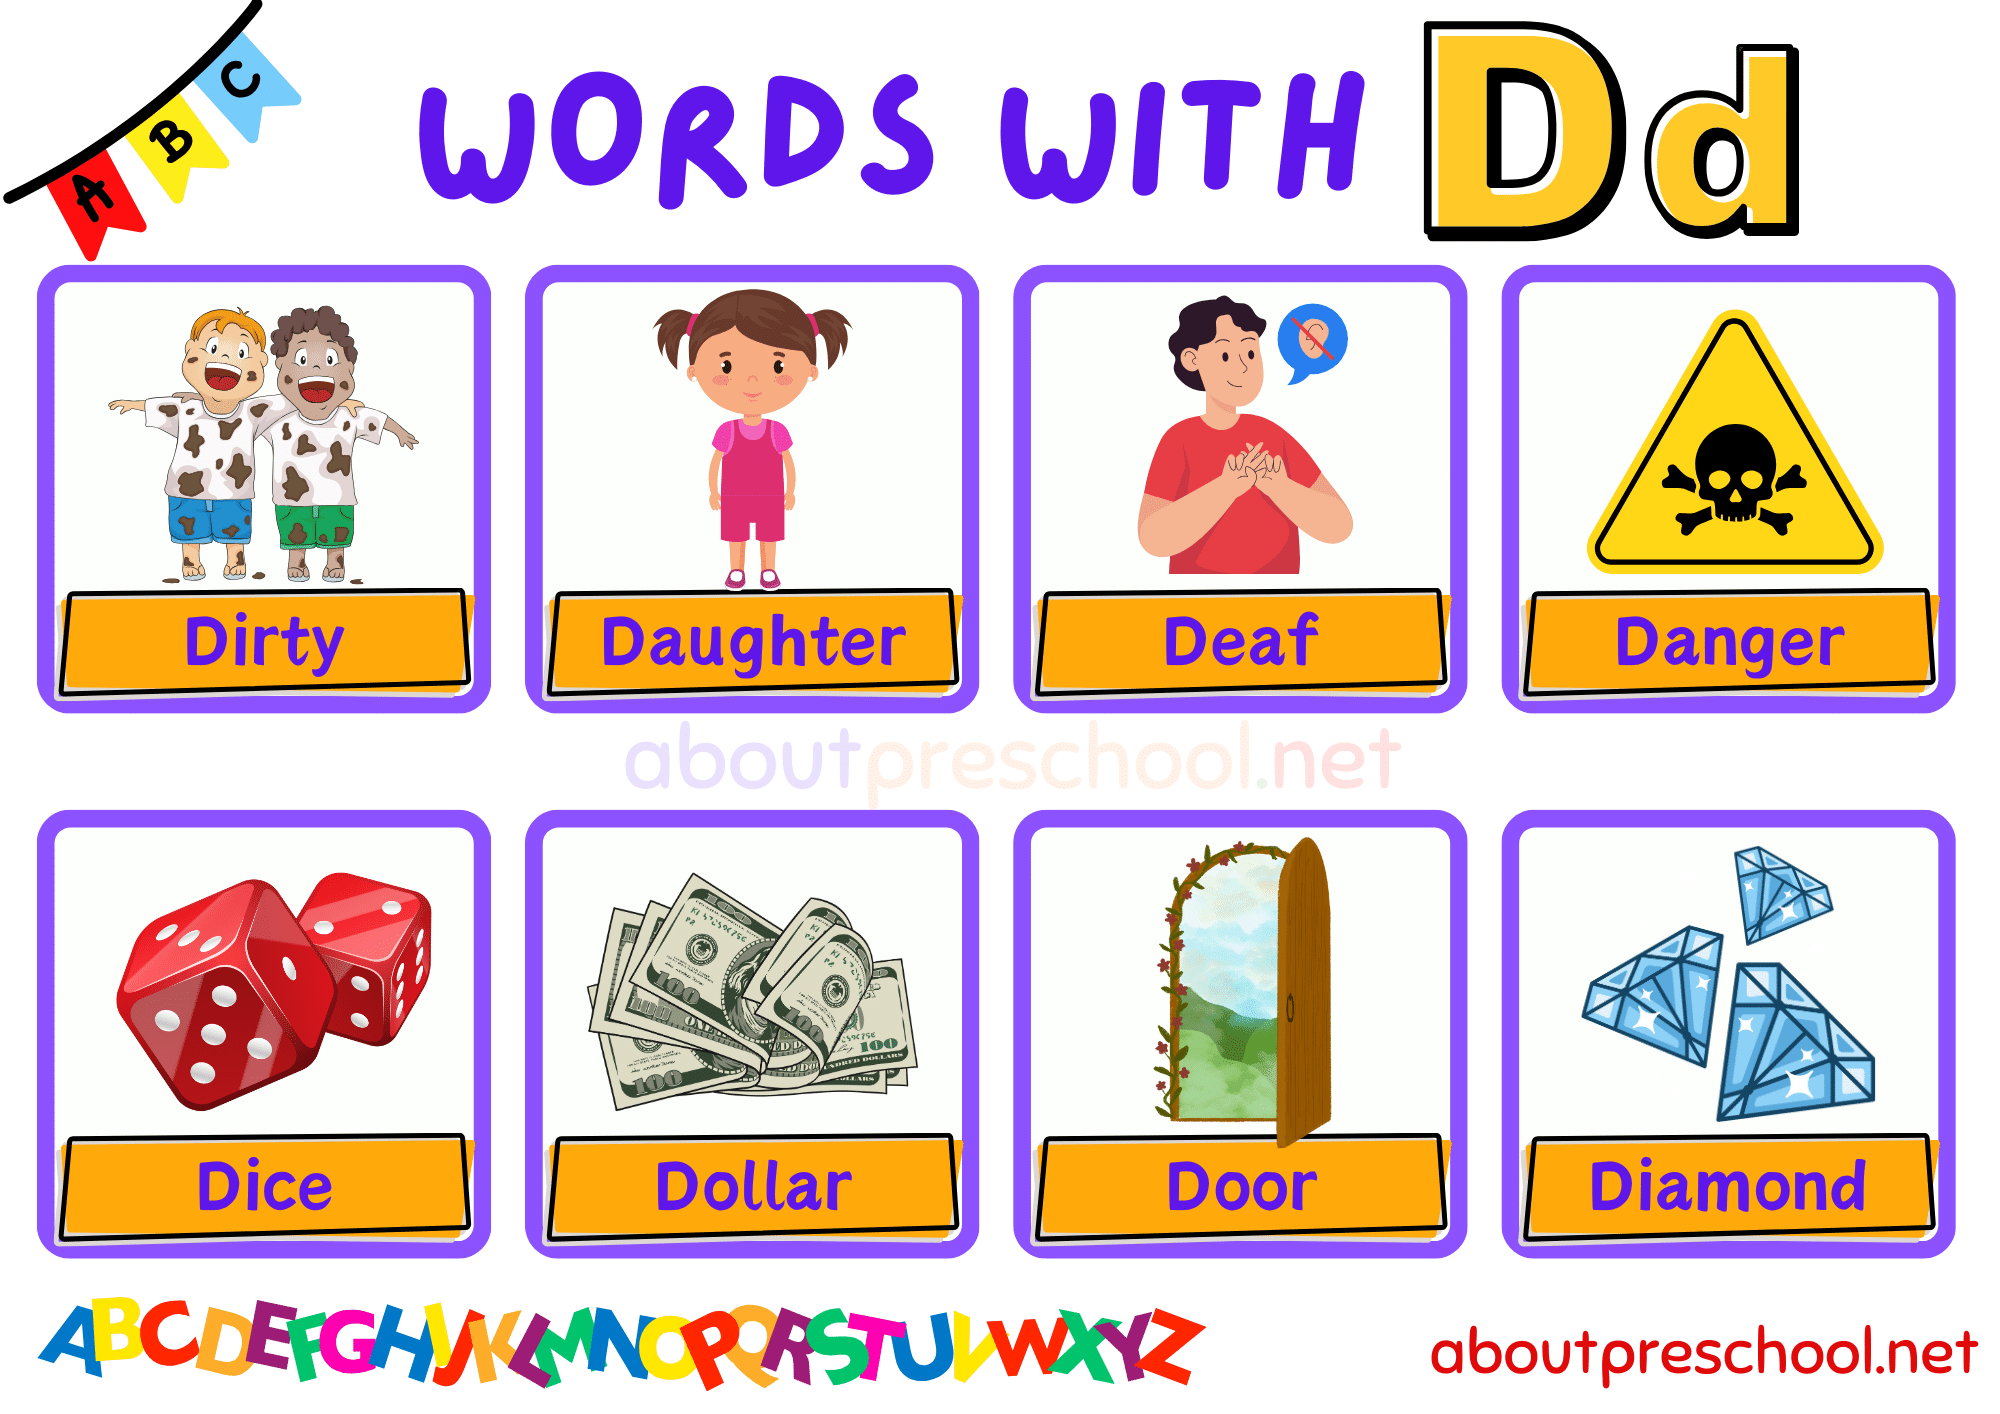 Words That Start With D